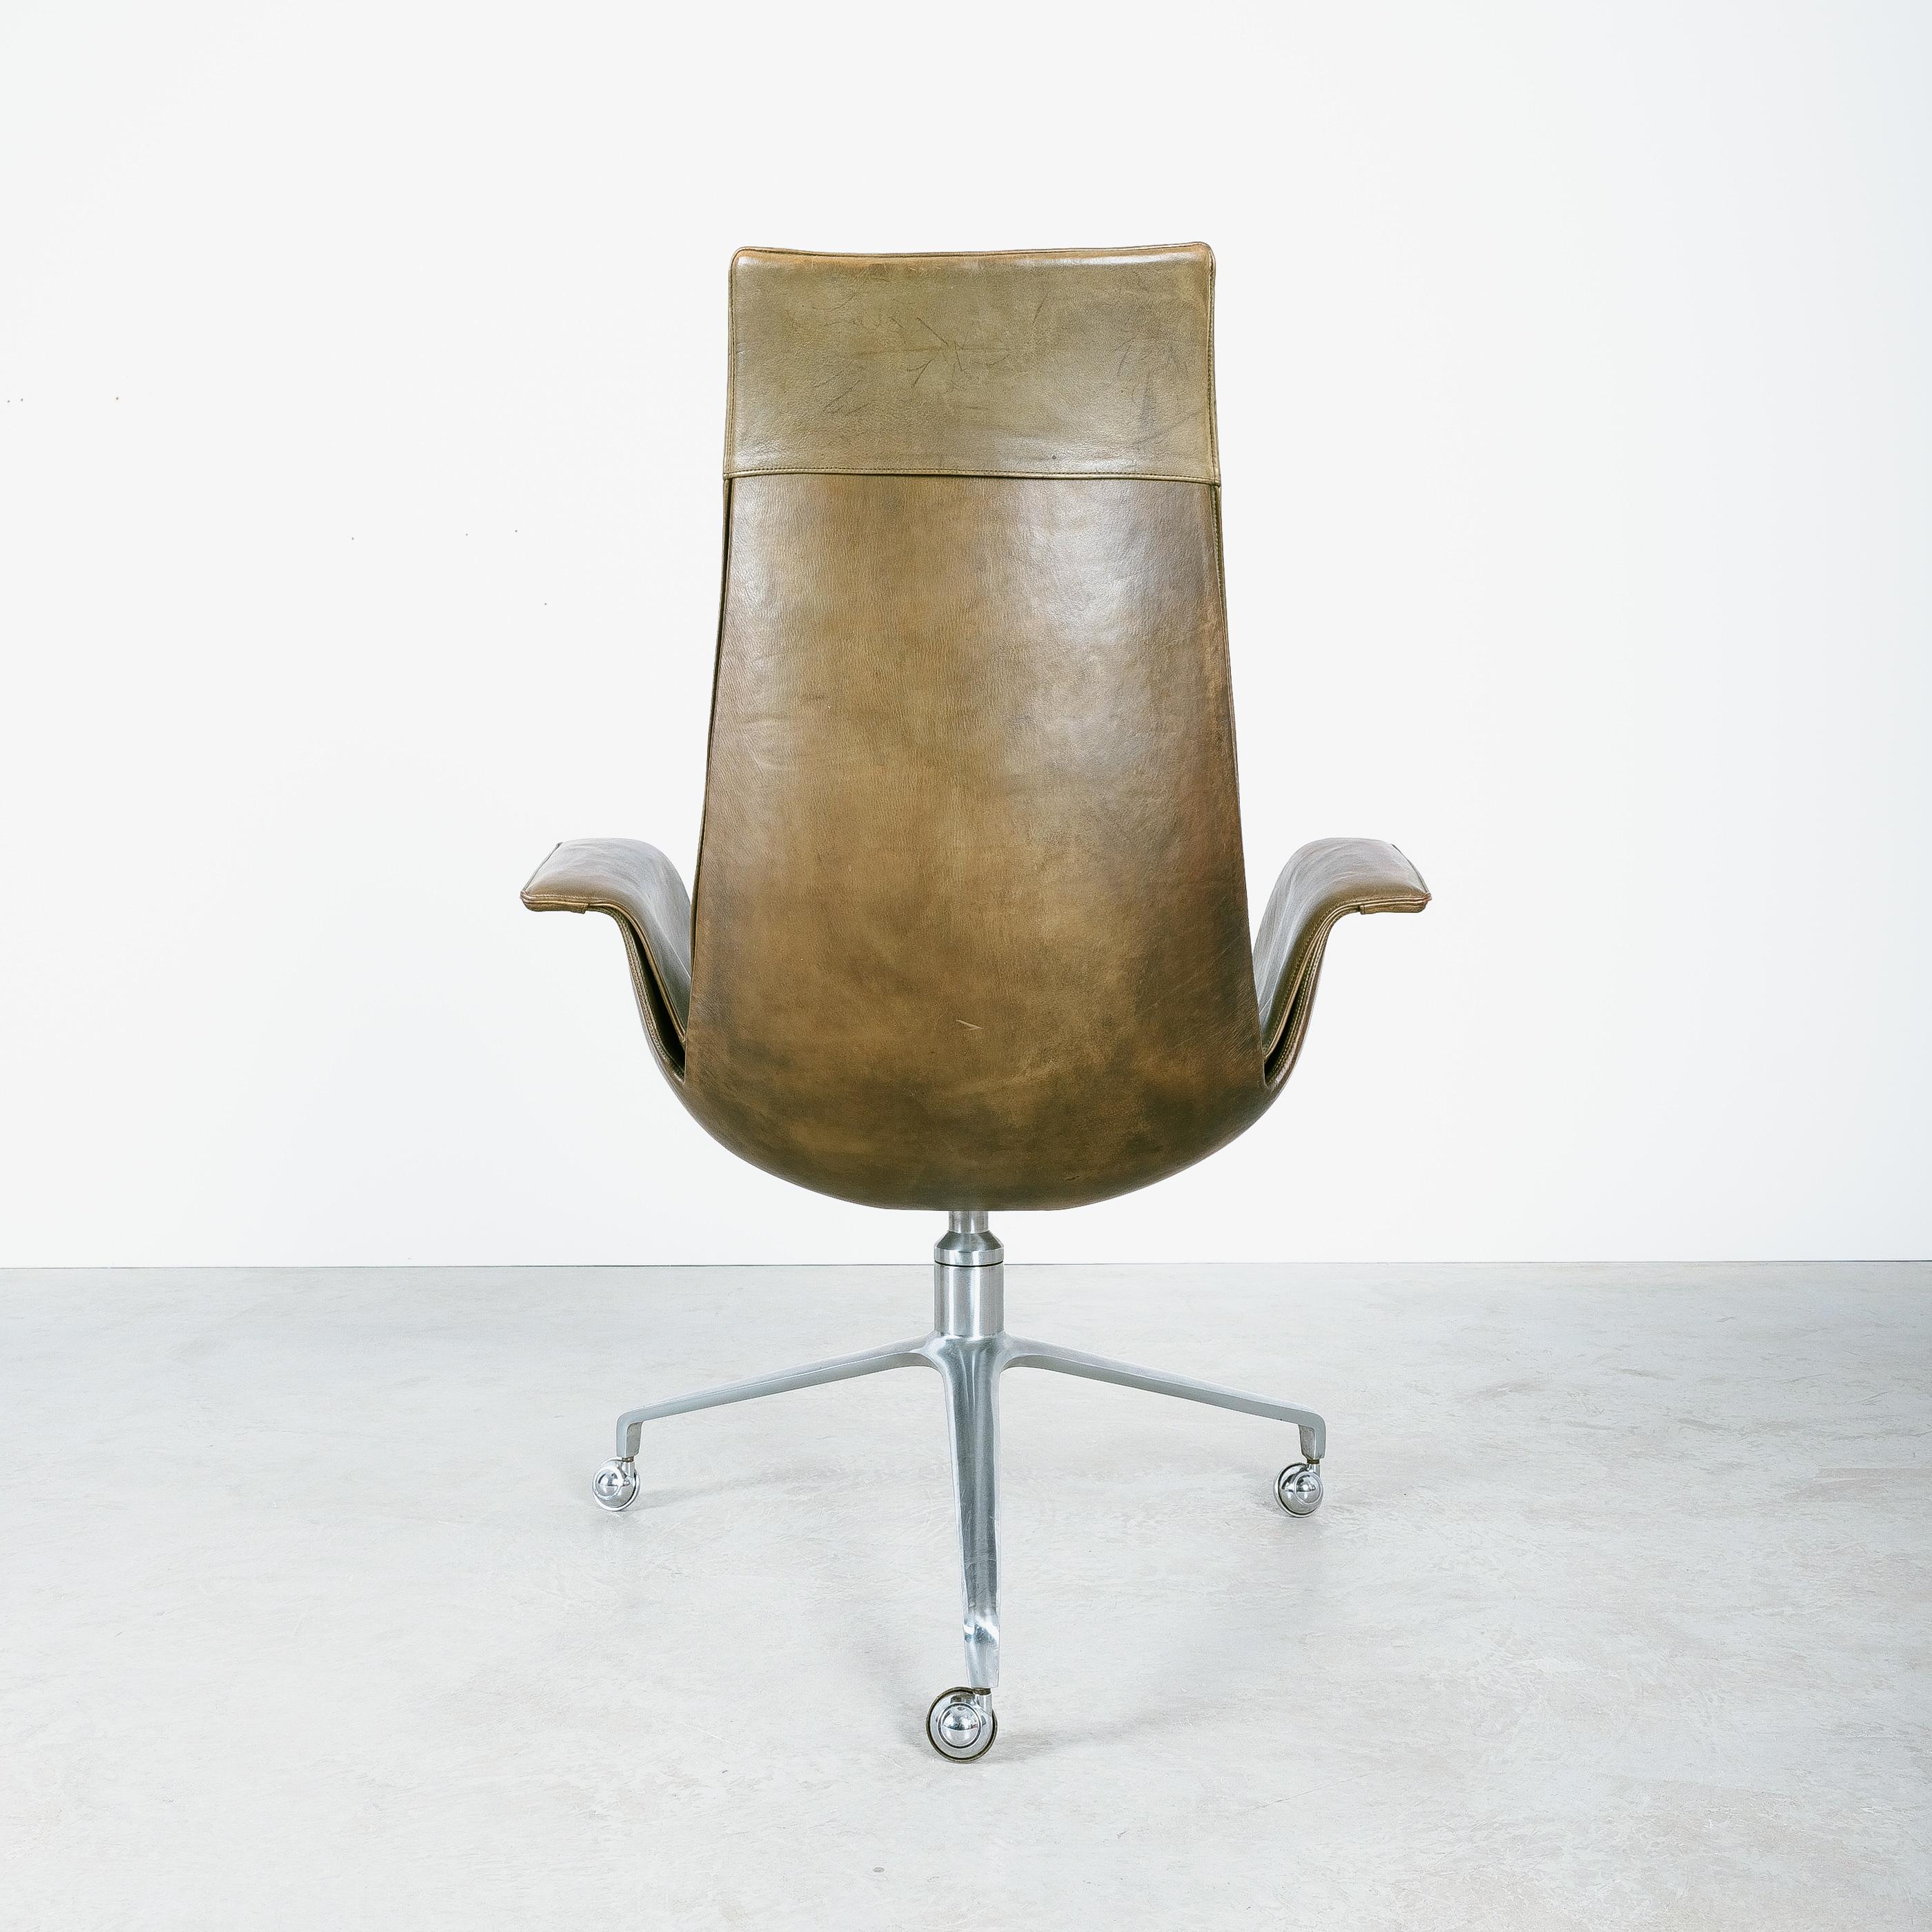 Dyed FK 6725 Fabricius and Kastholm Moss Green High Back Bird Desk Chair, 1964